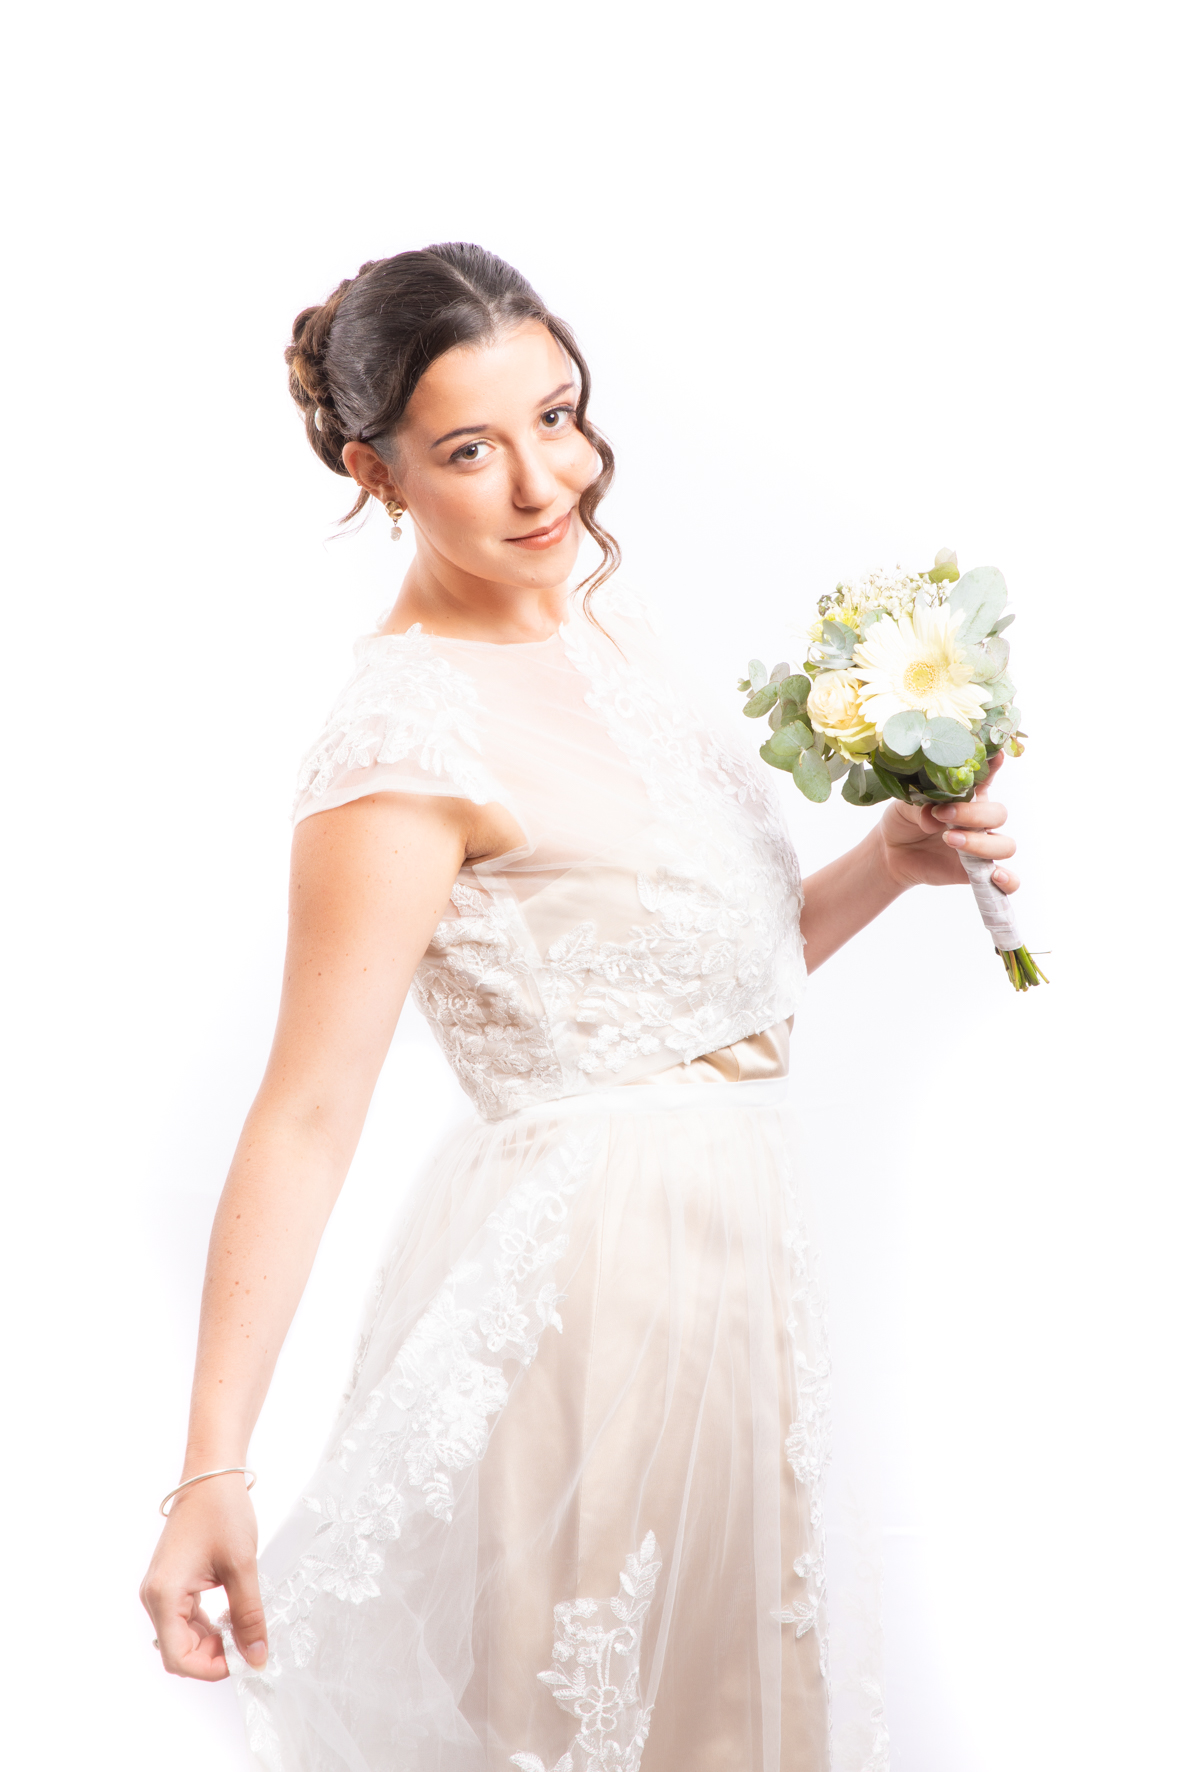 Victoire-Shooting mariage-SD-43366